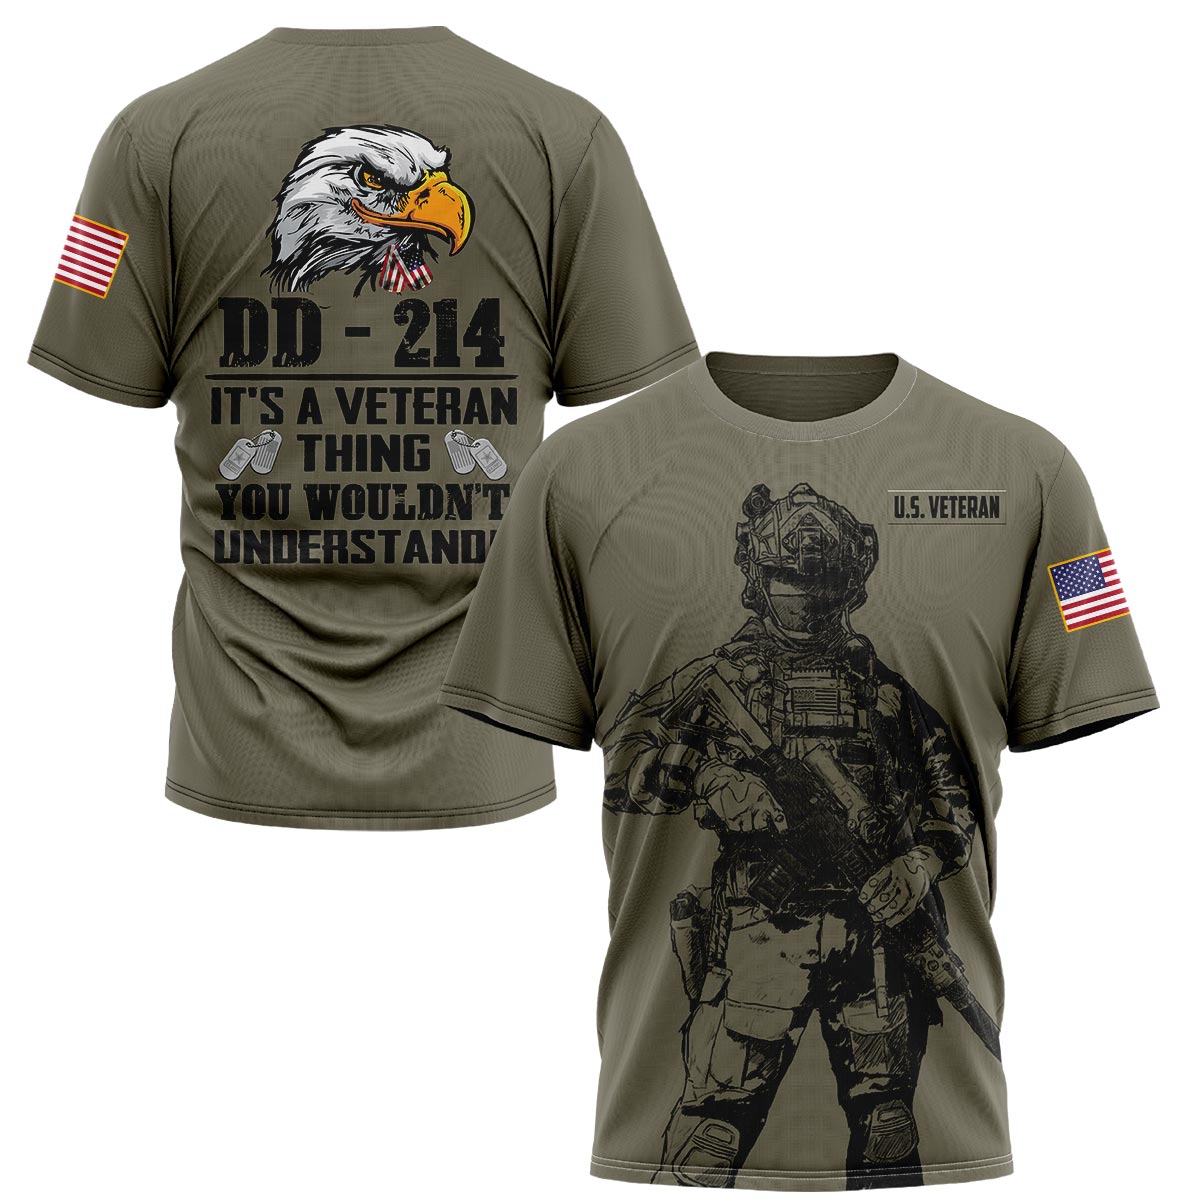 DD-214 It‘s A Veteran Thing You Wouldn’t Understand Shirt